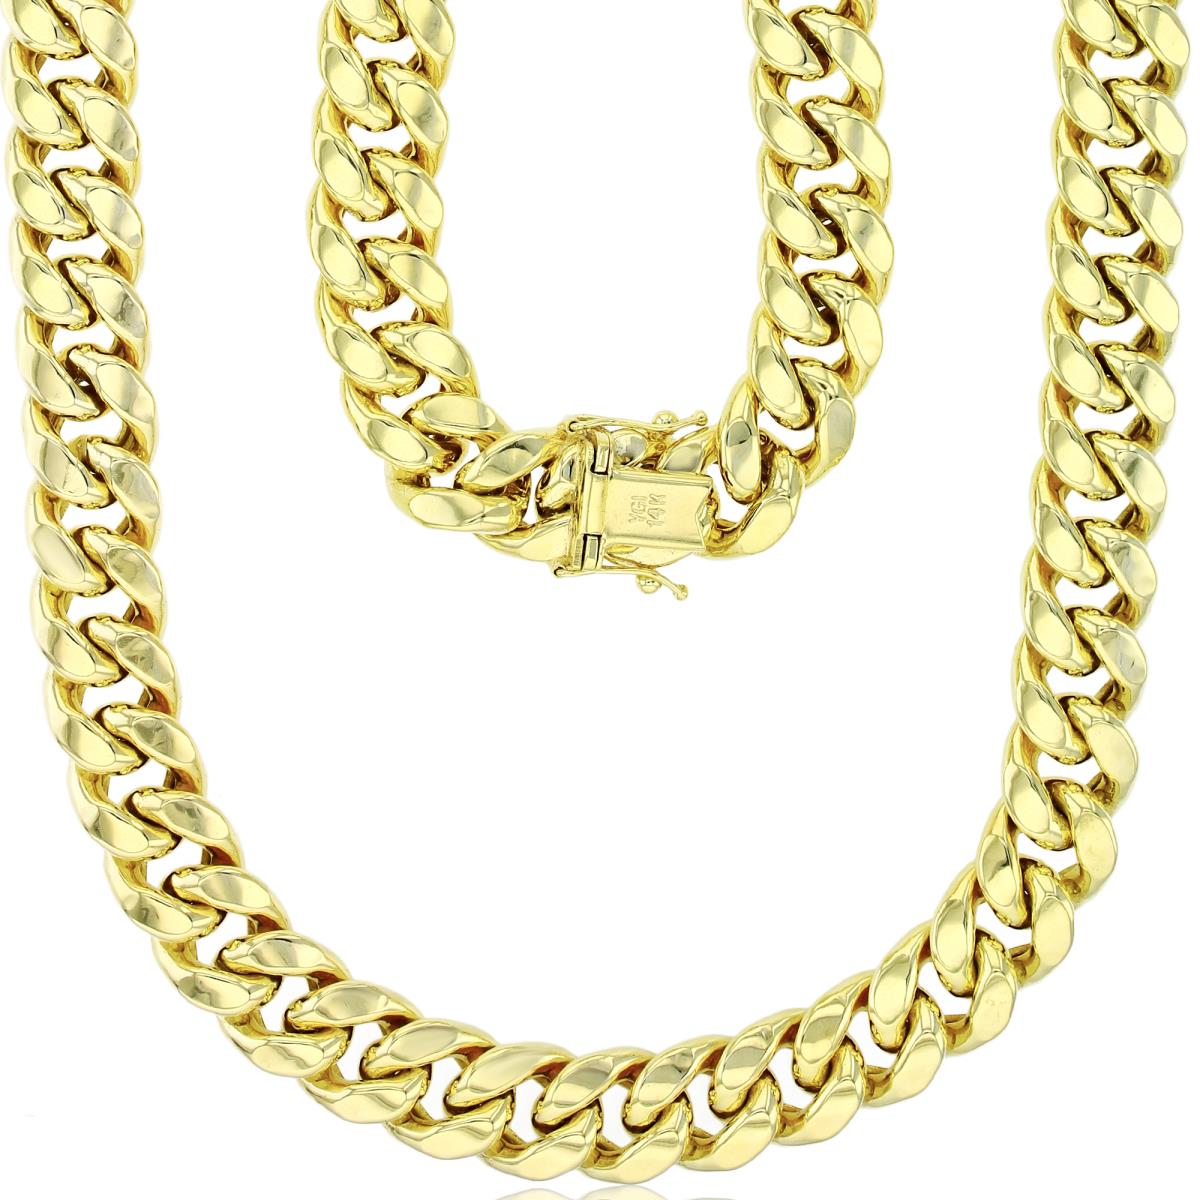 10K Yellow Gold 12mm 8.50" 300 Hollow Miami Cuban Chain with Box Lock